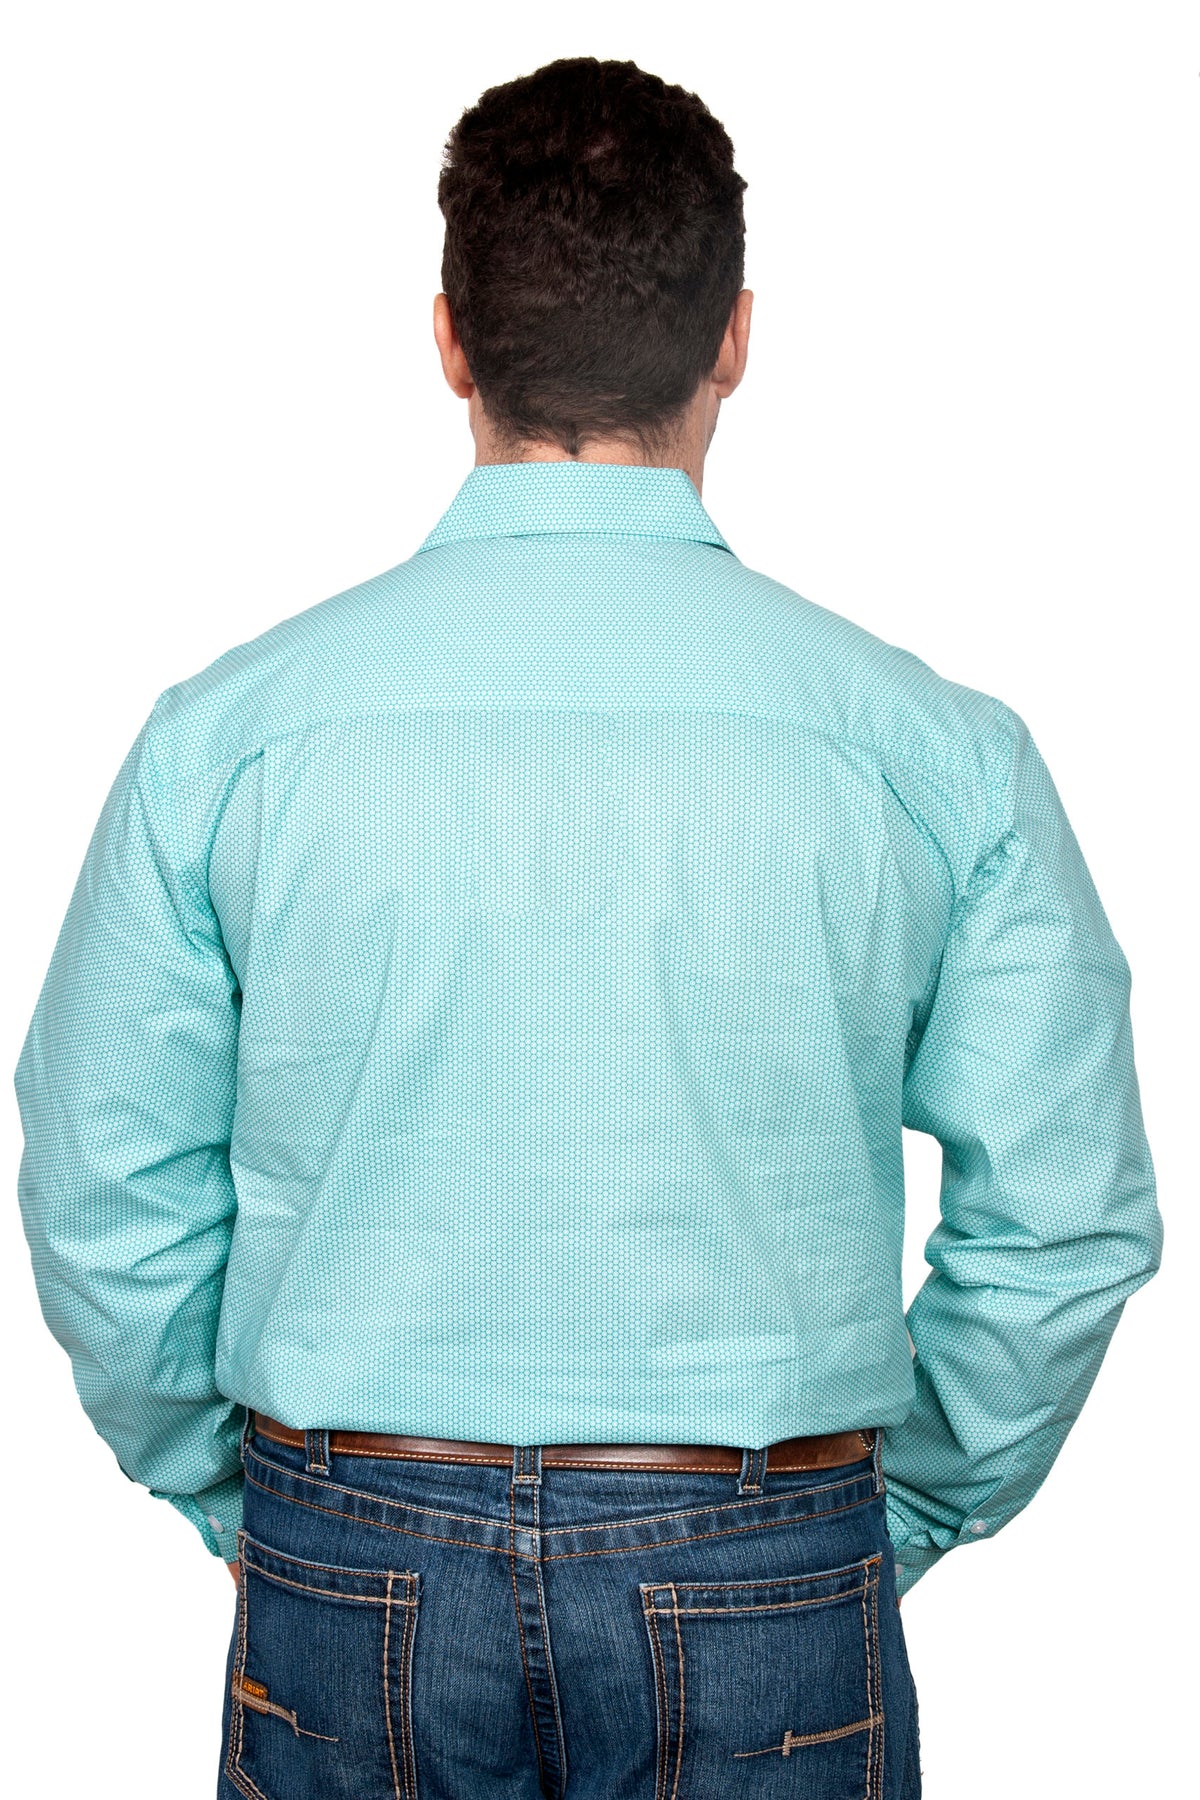 Just Country Austin Workshirt - Turquoise/White Dots